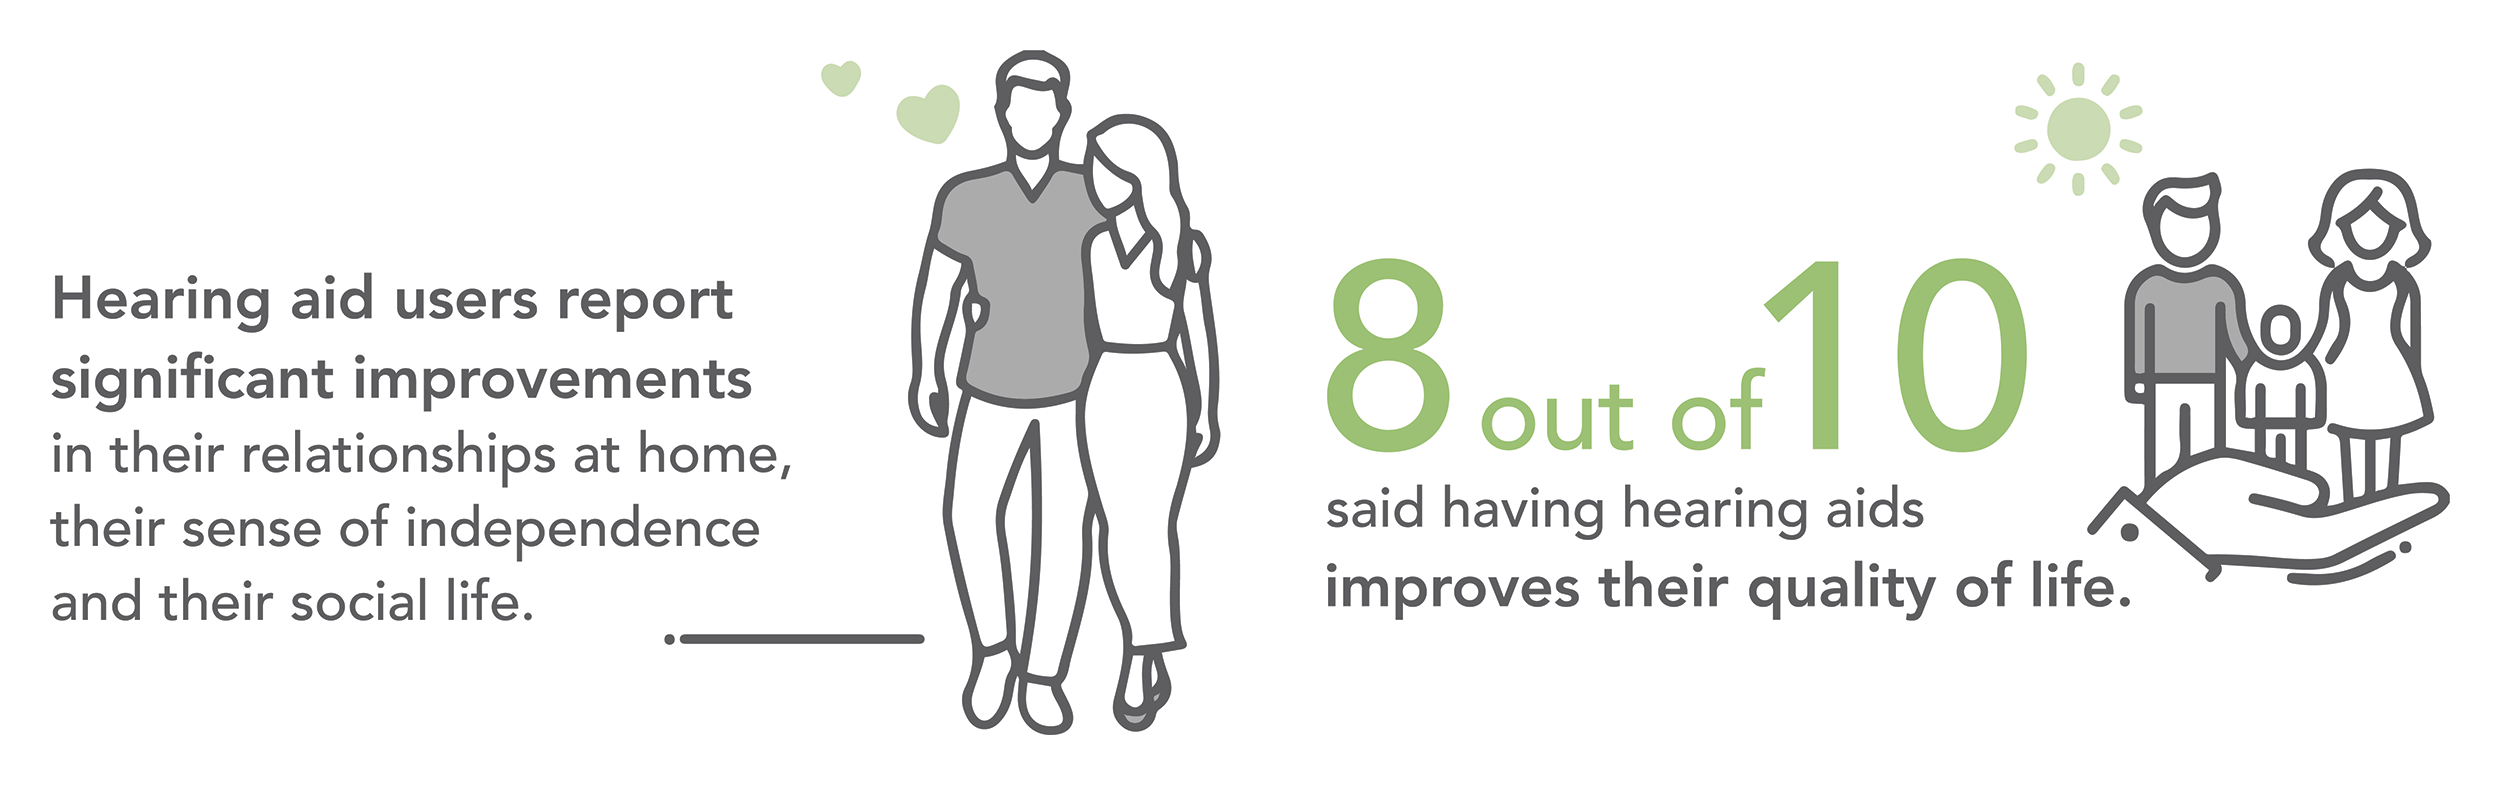 Hearing aid users report significant improvements in their relationships at home, their sense of independence and their social life. 8 out of 10 said having hearing aids improves their quality of life